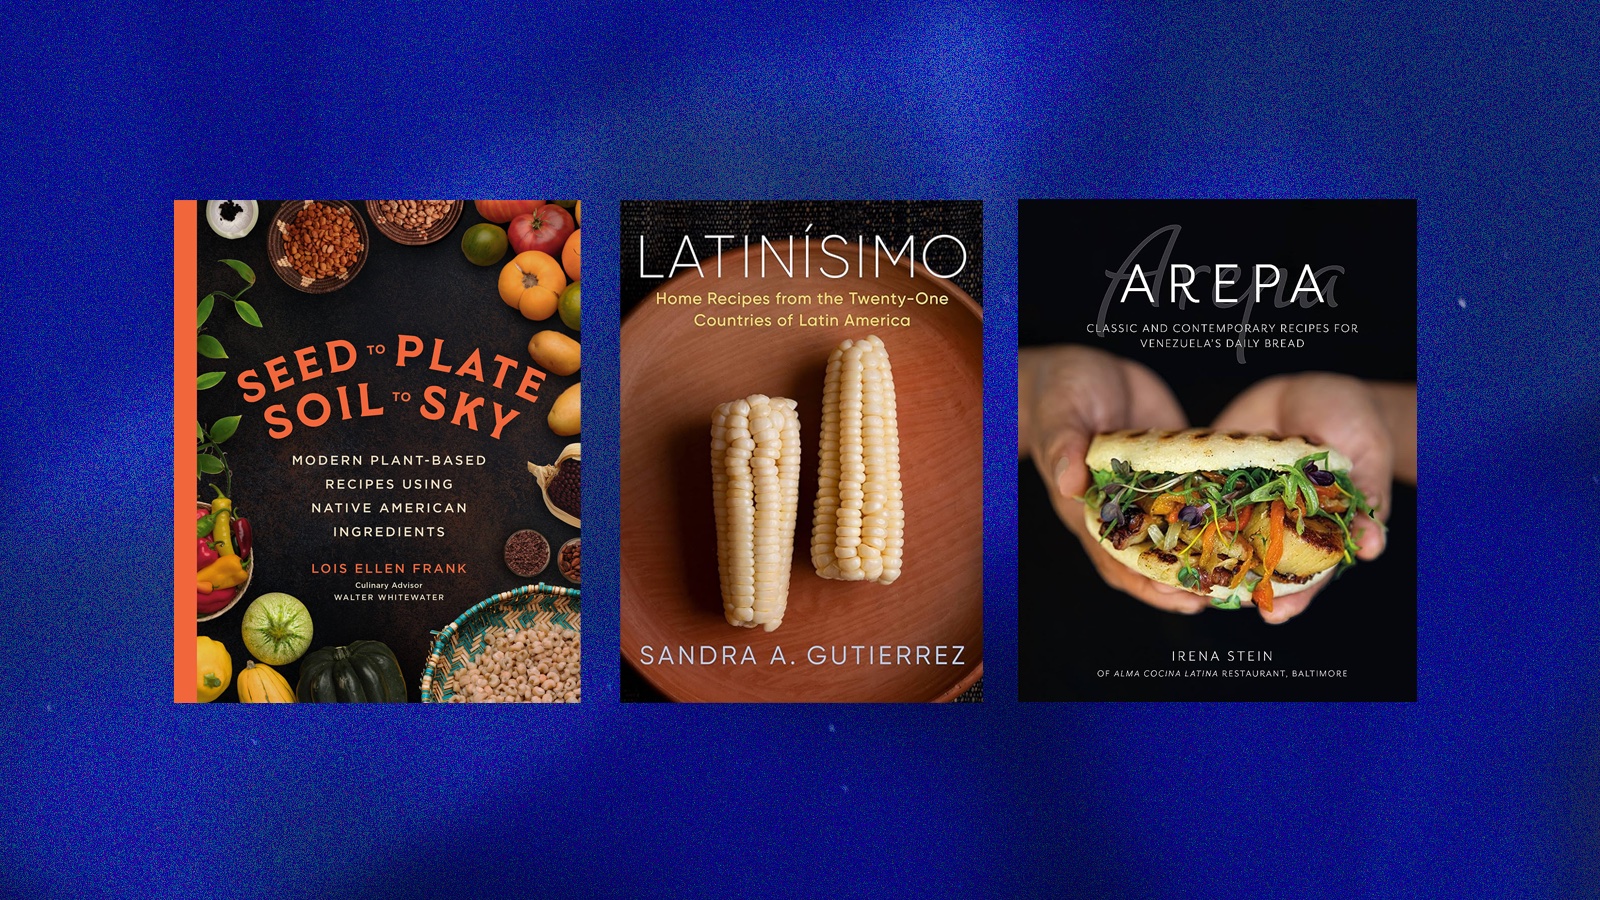 The covers of Seed to Plate Soil to Sky, Latinisimo, and Arepa